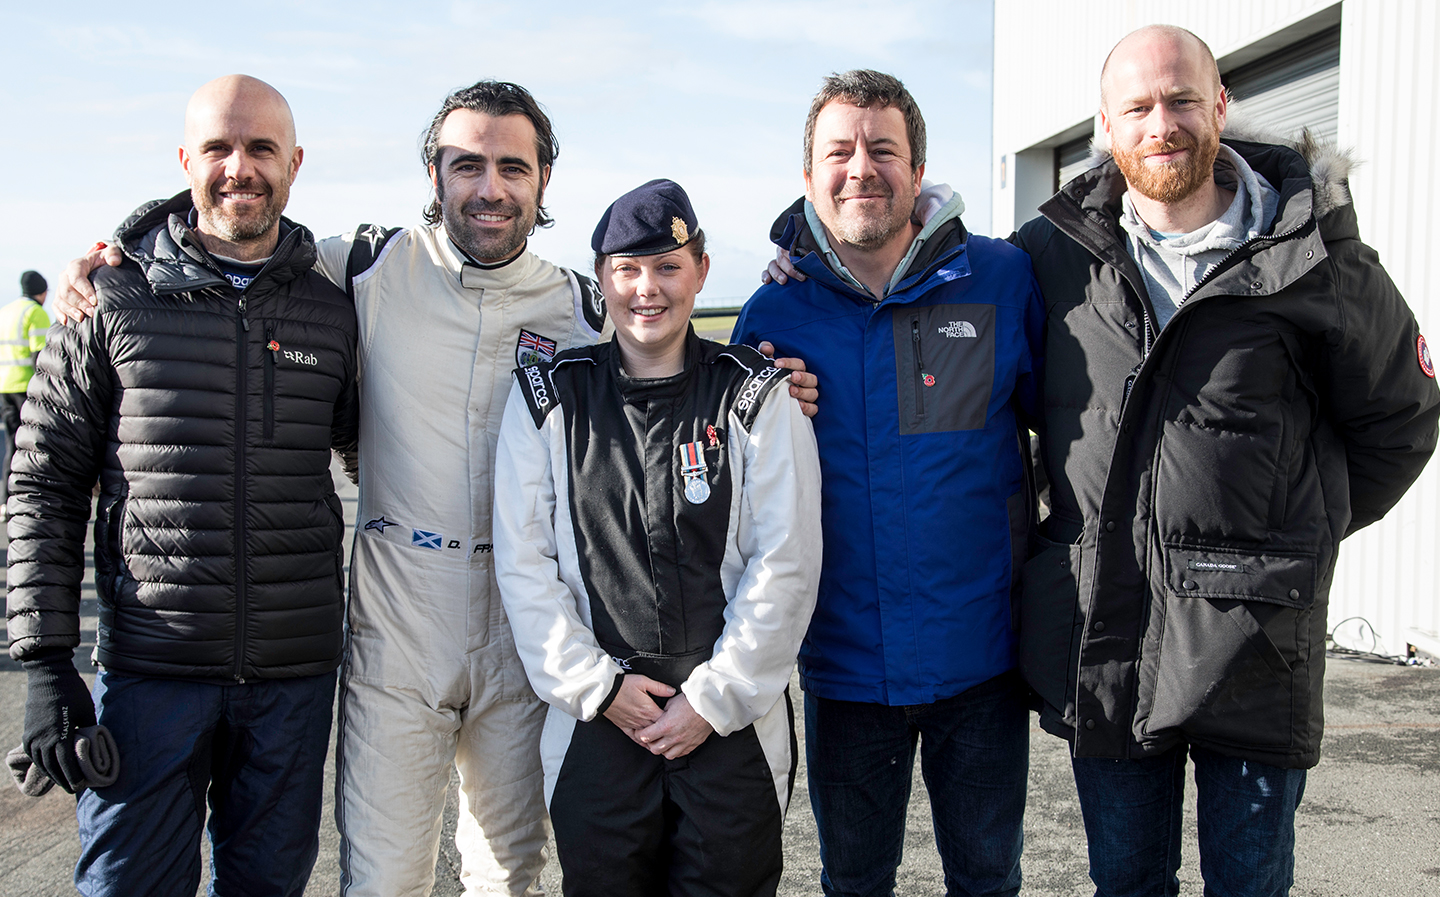 A remarkable mission: On track at Race of Remembrance 2019 - Sophie Burt with Dario Franchitti, Marino Franchitti, Dickie Meaden and Jamie Clarke